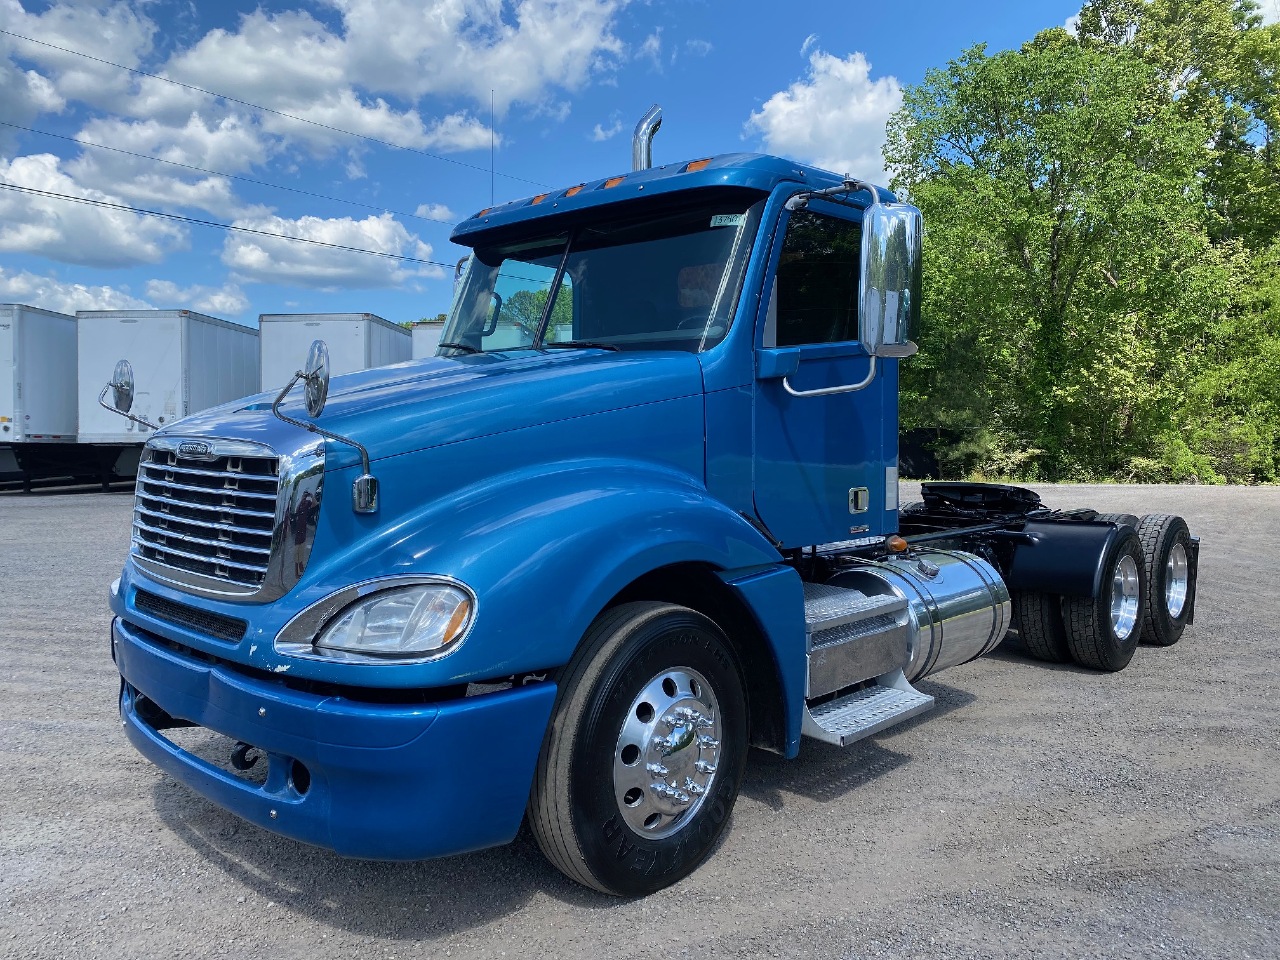 USED 2012 FREIGHTLINER COLUMBIA TANDEM AXLE DAYCAB TRUCK #15297